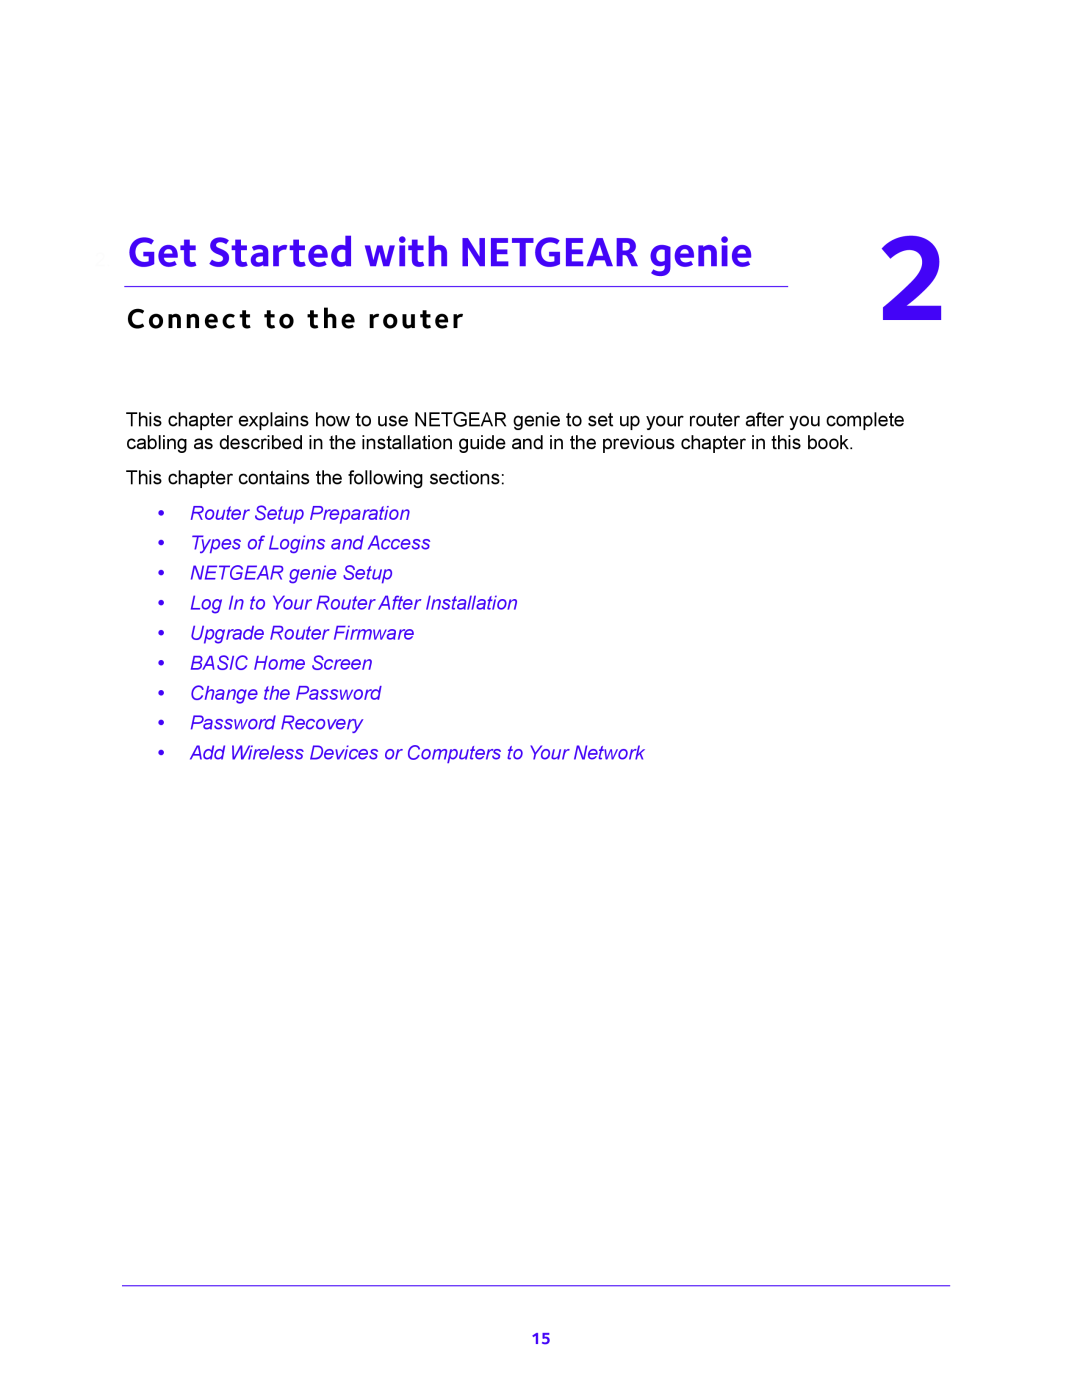 NETGEAR JNR1010V2 user manual Get Started with NETGEAR genie, Connect to the router 